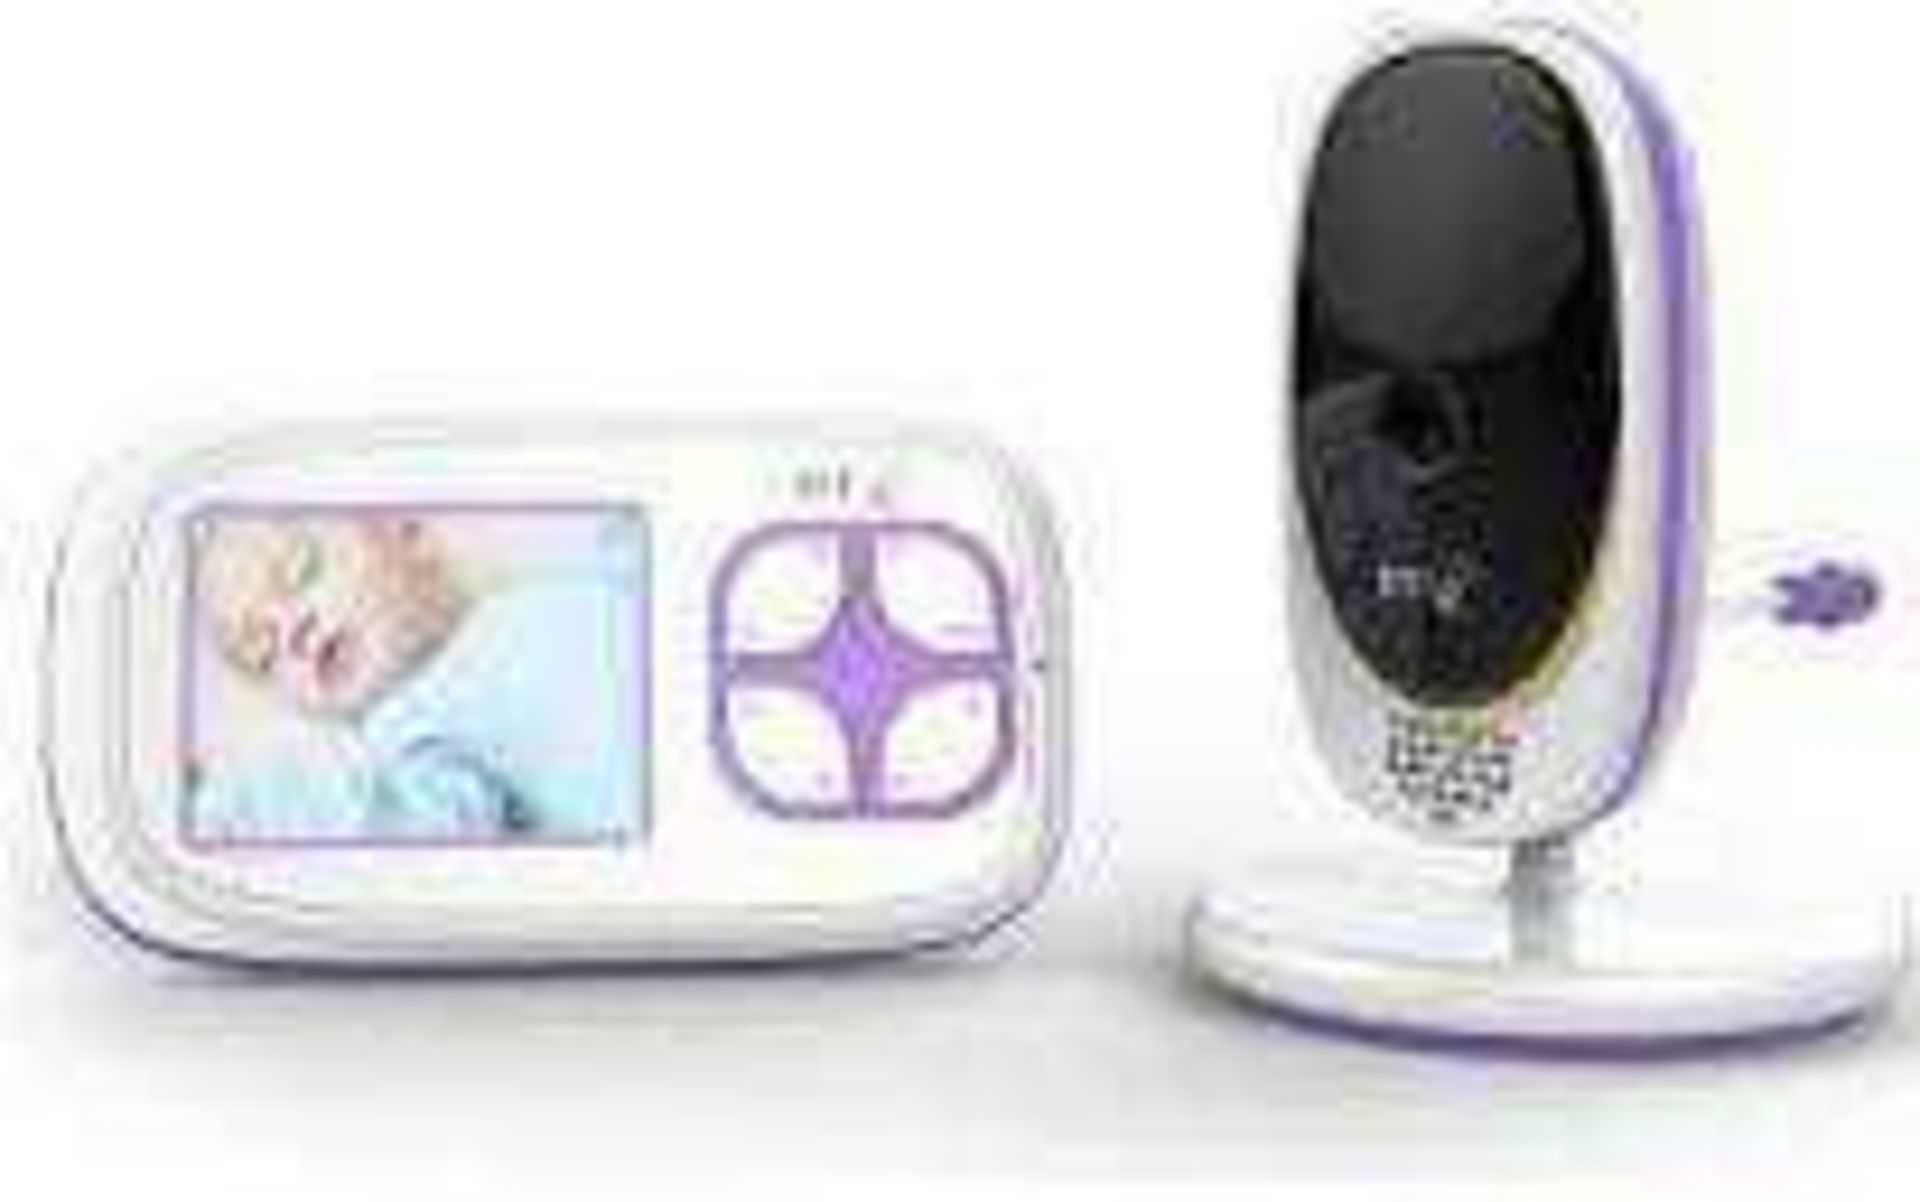 RRP £130 Boxed Bt Video Baby Monitor 6000